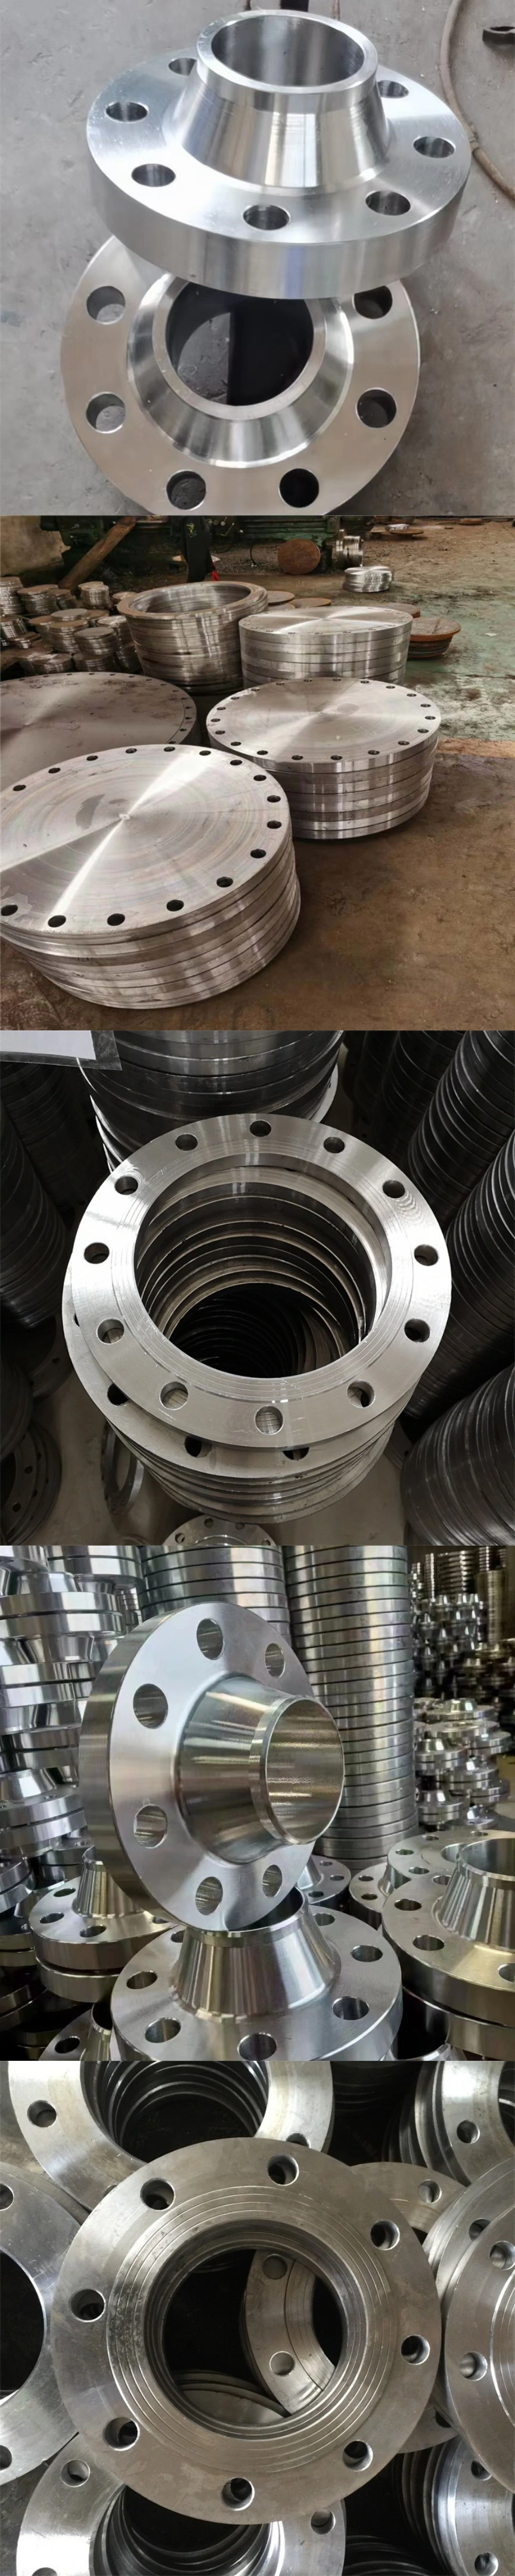 Steel Flanges Carbon Steel Pn10/16 Welded Flange ASTM Forged Threaded Drainage Pipe Fittings Flange